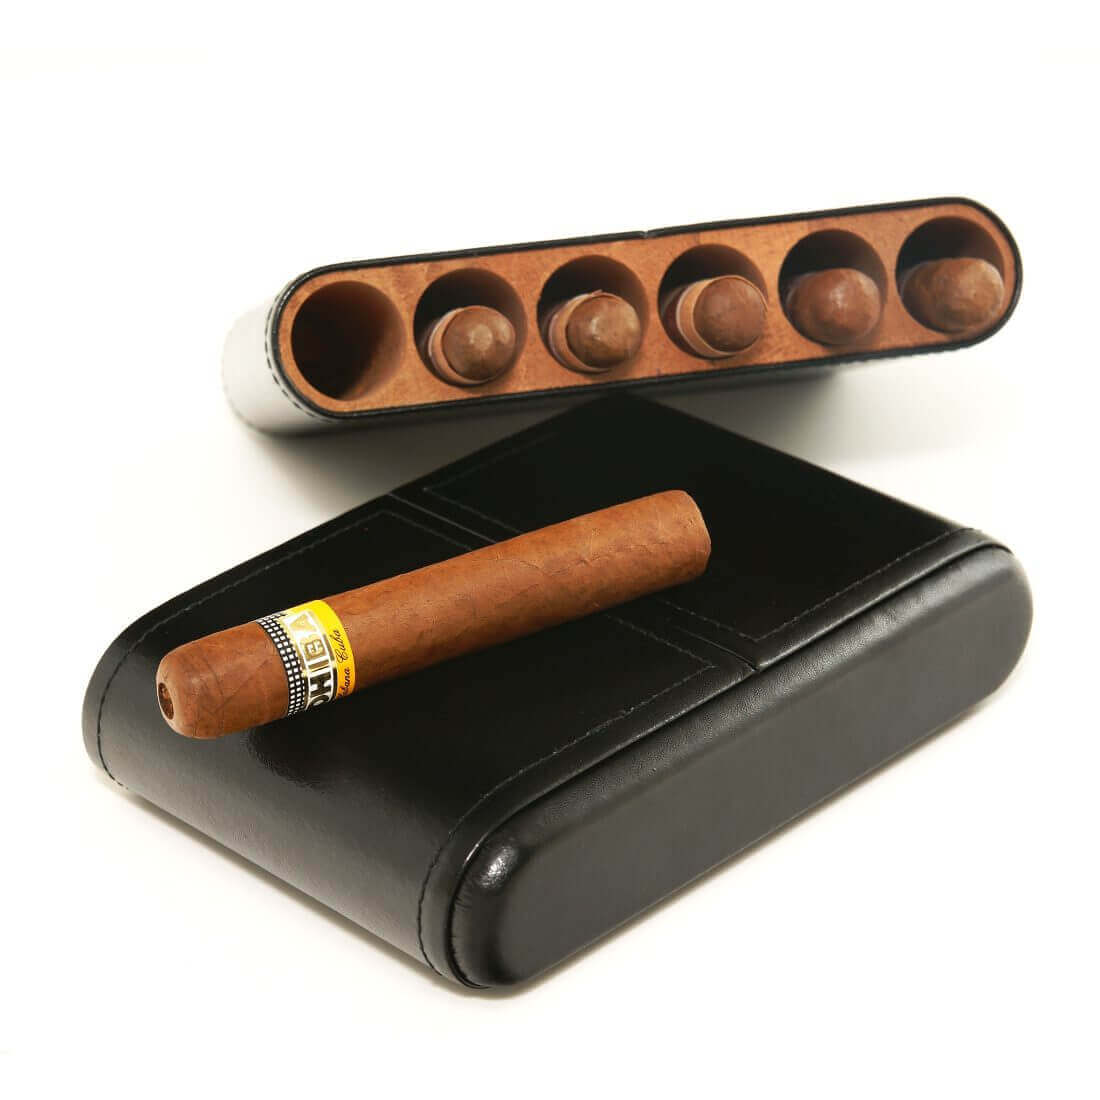 Canadian Cigar Star has been providing fine quality cigar accessories and humidors for 14 years.